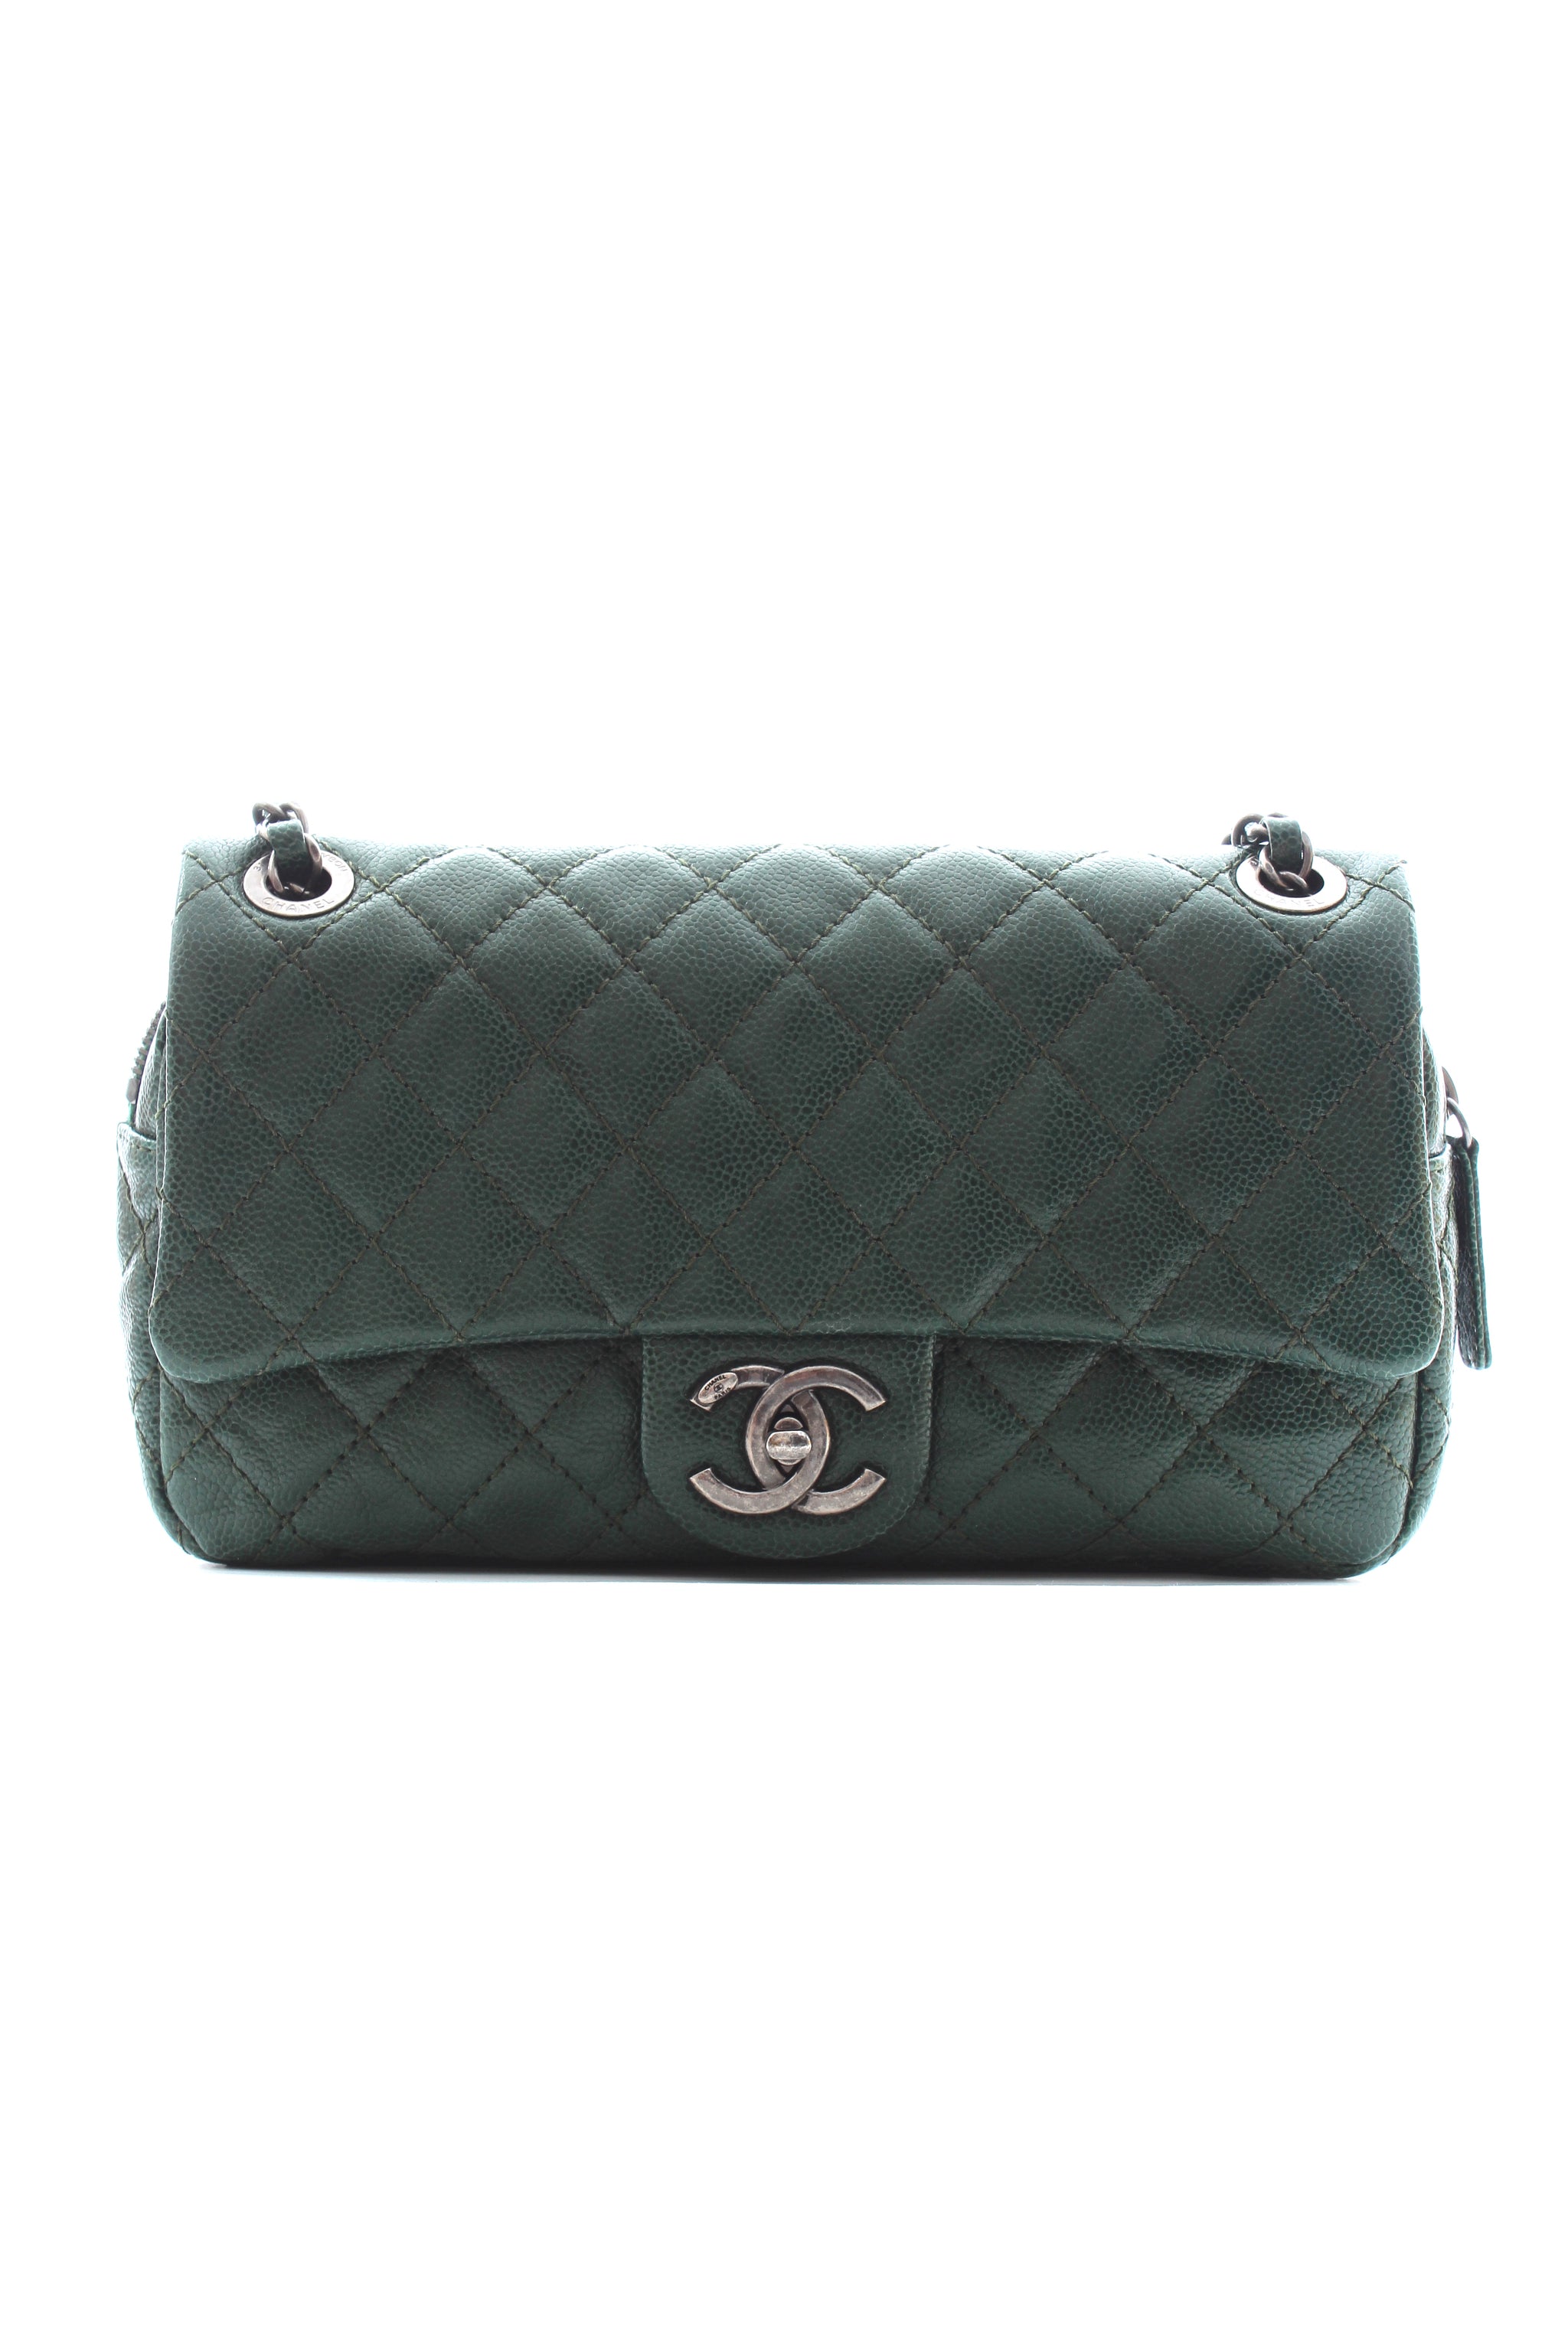 Chanel Easy Caviar Quilted Leather Flap Bag